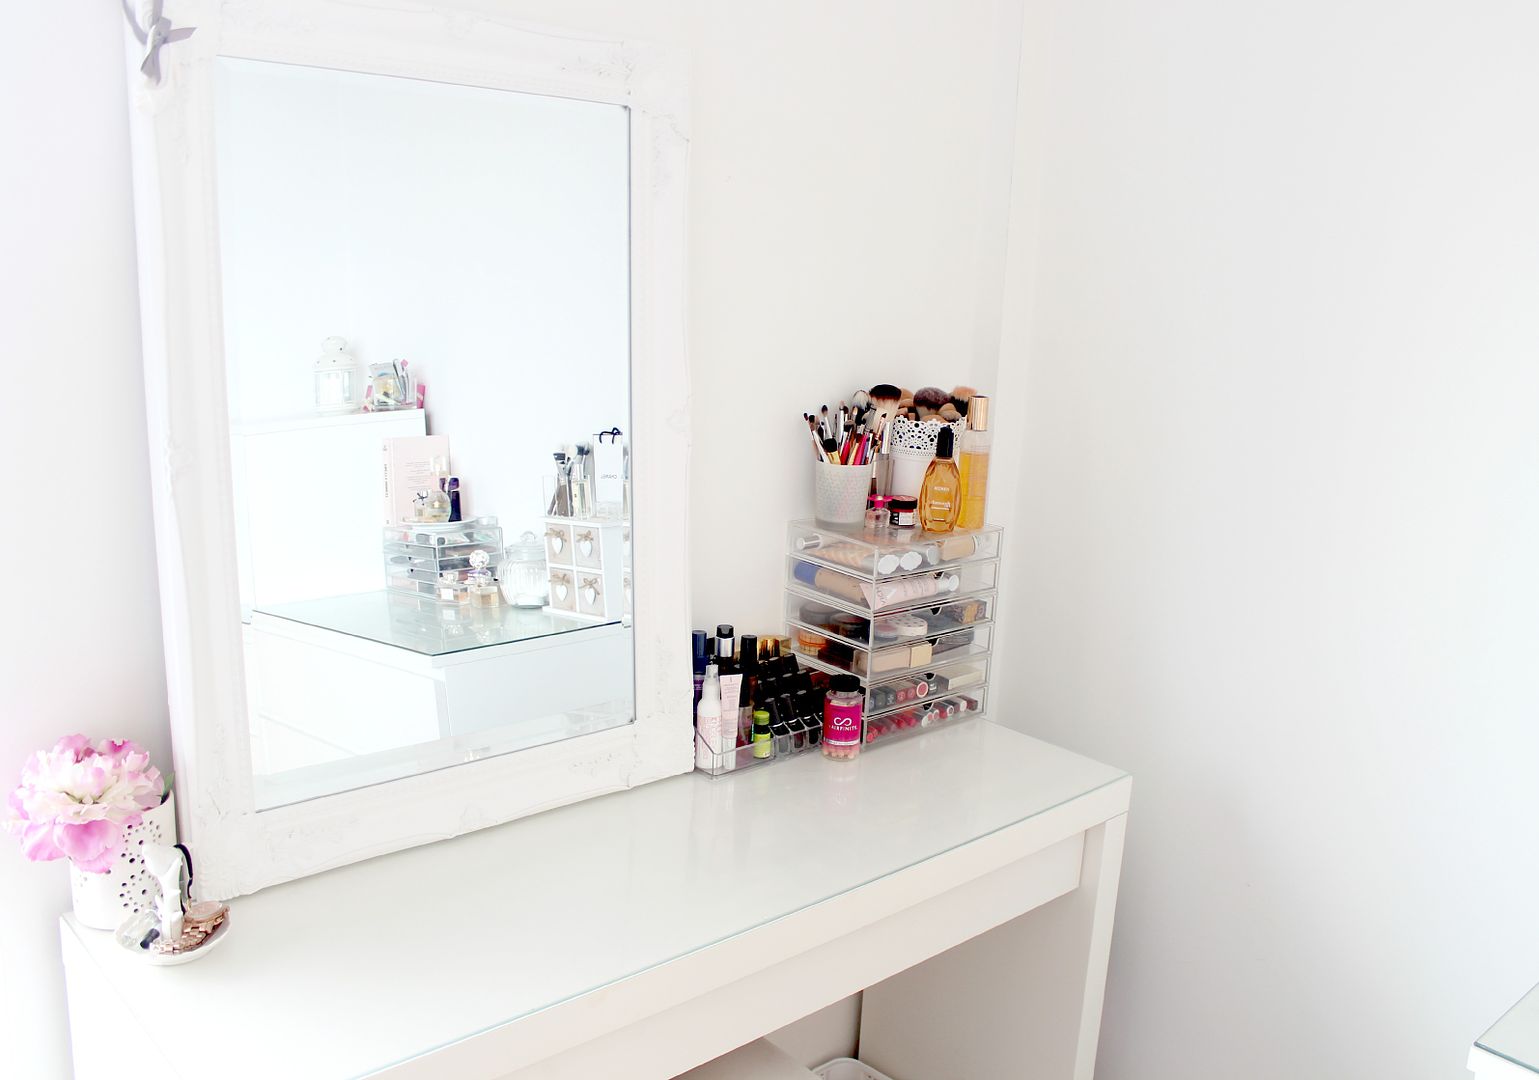 My Dressing Table and Makeup Storage, IKEA Malm Dressing Table, Muji Acrylic Drawers, Makeup and Beauty Storage Ideas, Makeup Storage Inspiration